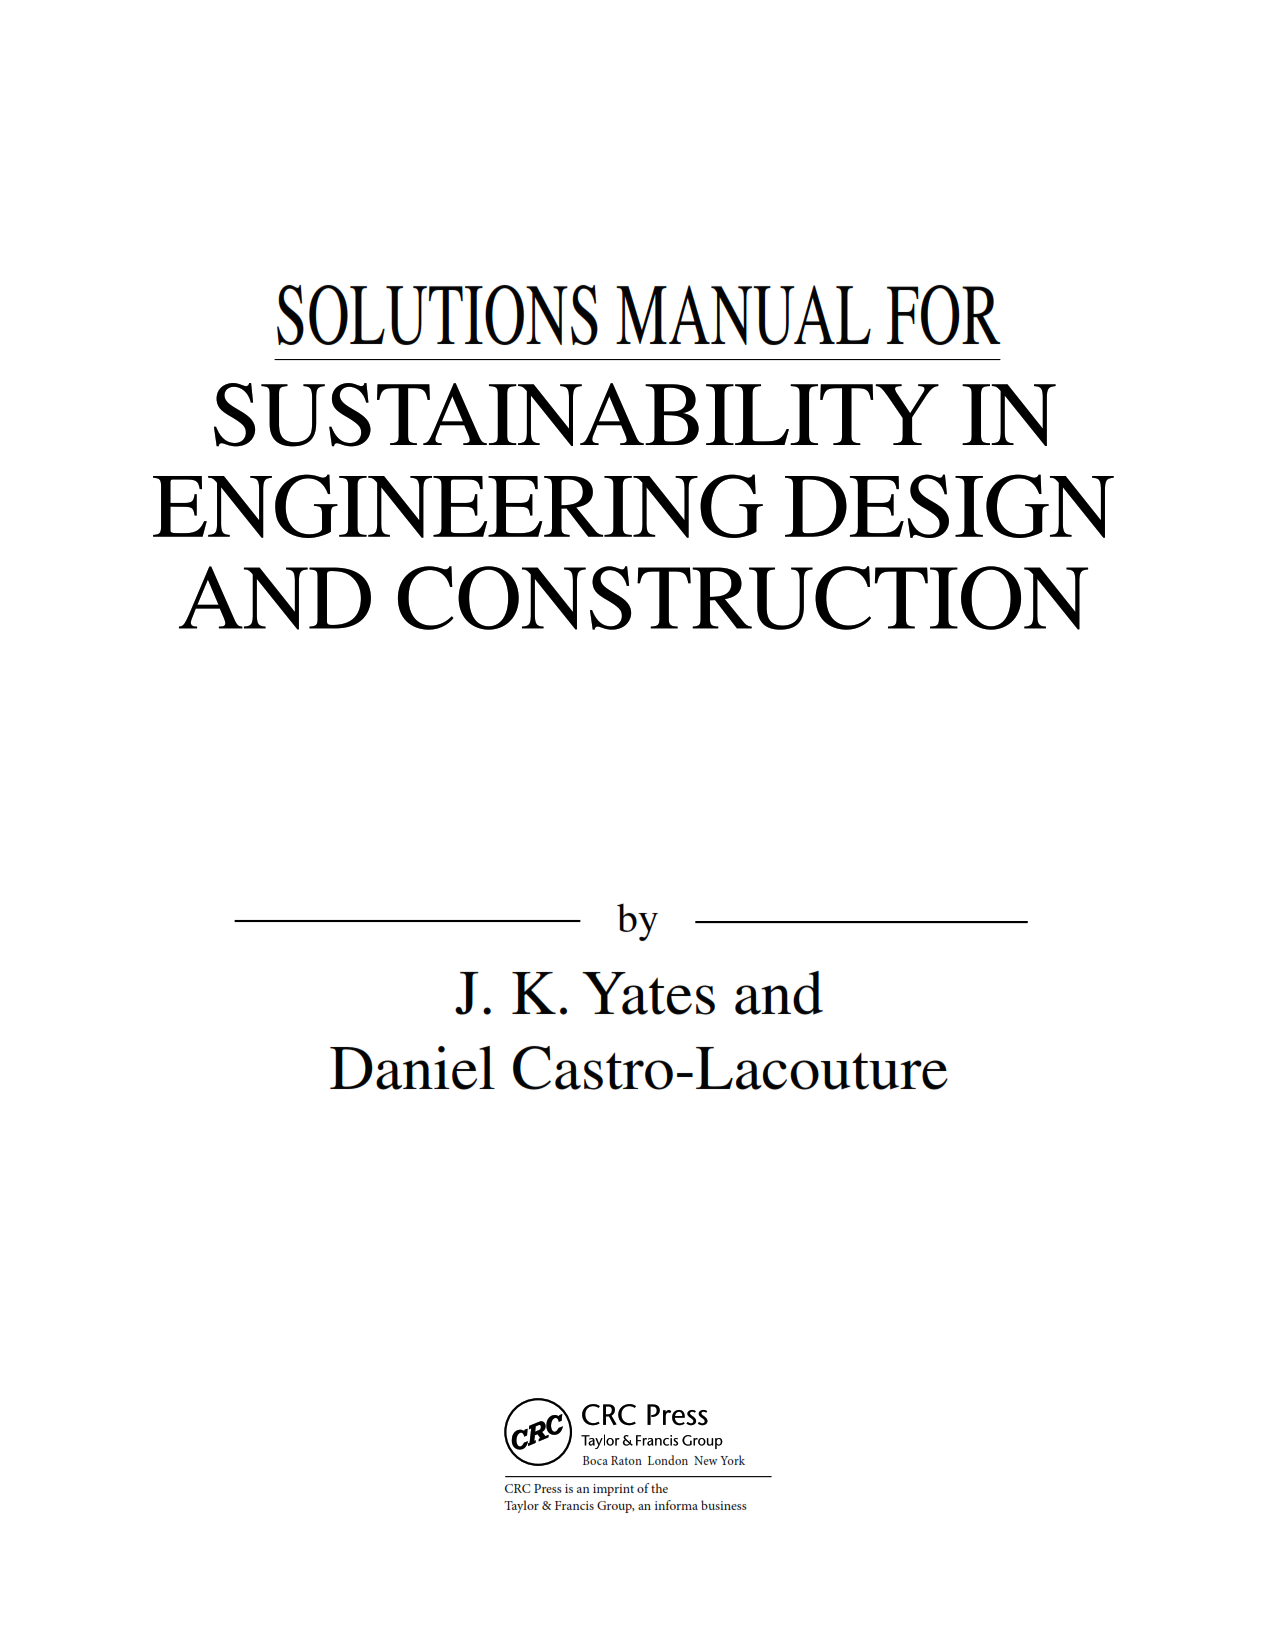 Download free sustainability in engineering design and construction by Yates & Castro-Lacouture 1st edition solutions manual | solution